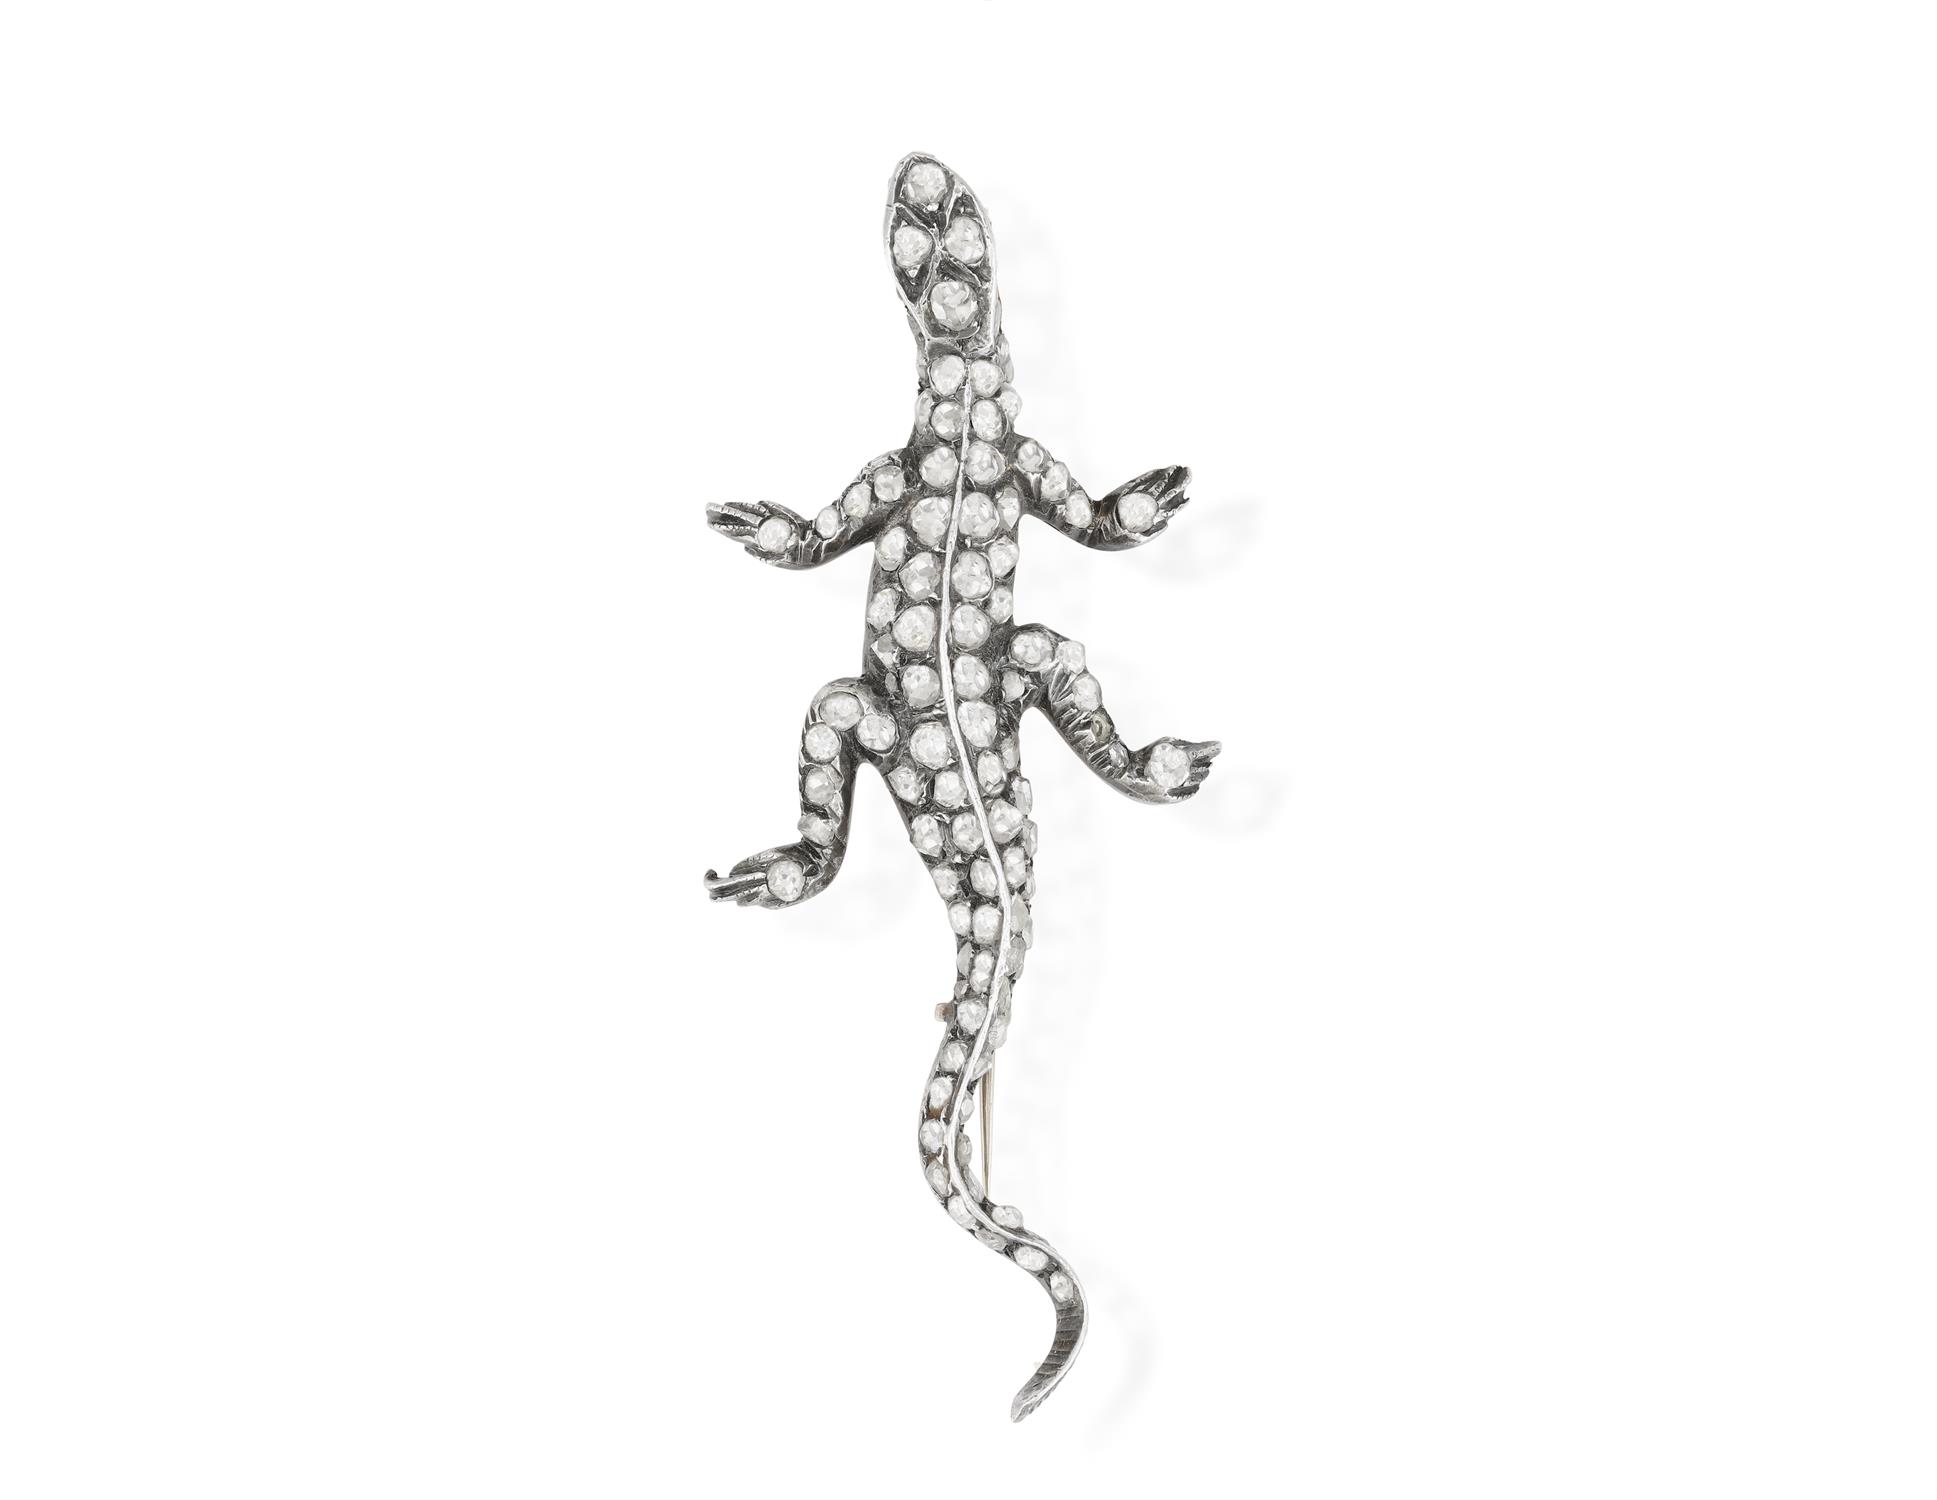 A LATE 19TH CENTURY DIAMOND AND RUBY NOVELTY BROOCH, CIRCA 1880 Modelled as a lizard,